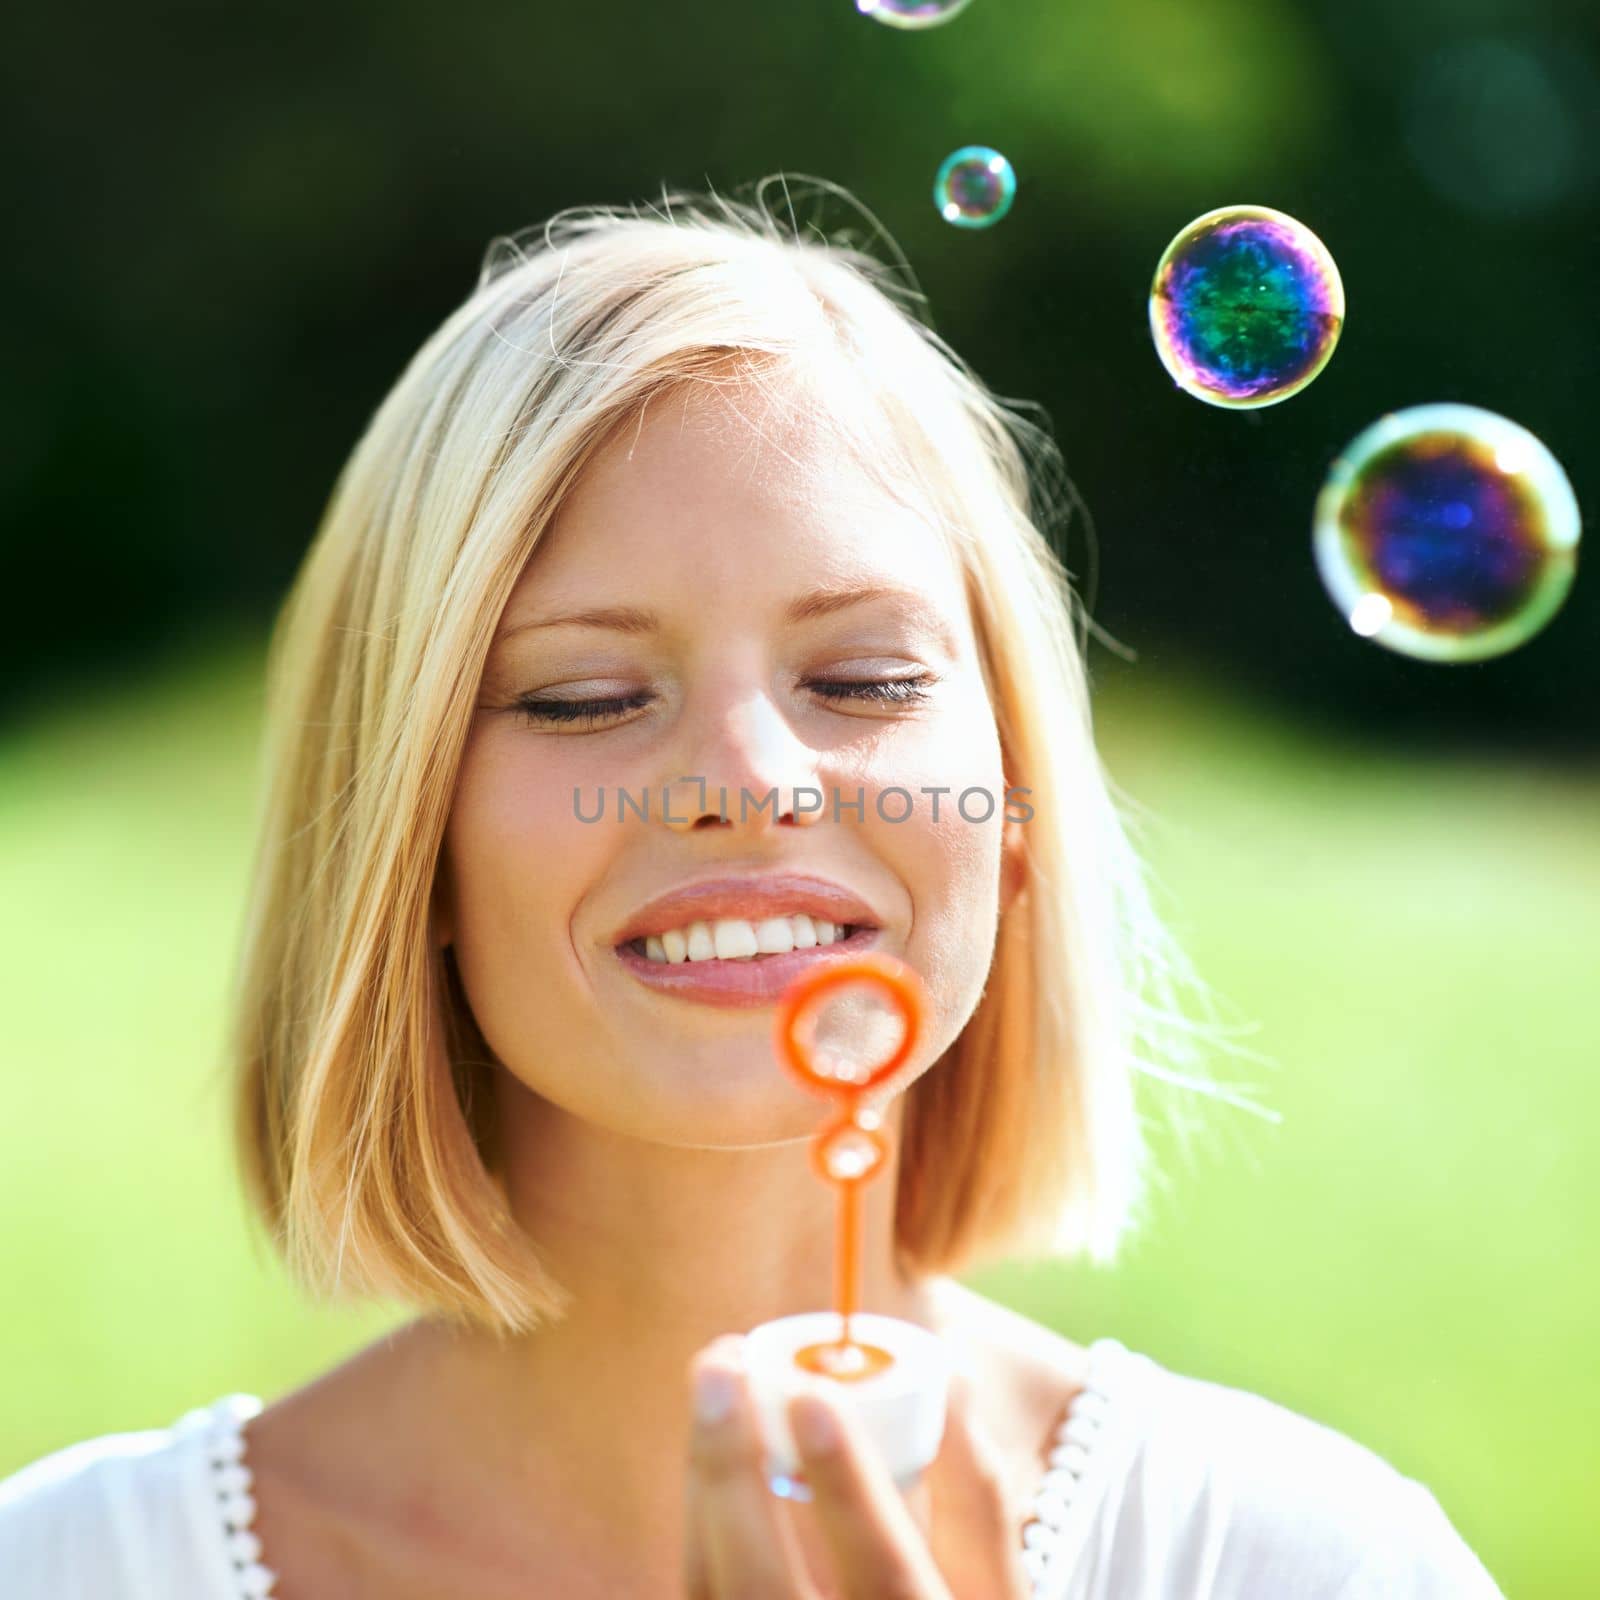 Having some innocent fun. Smiling young woman blowing soap bubbles outdoors